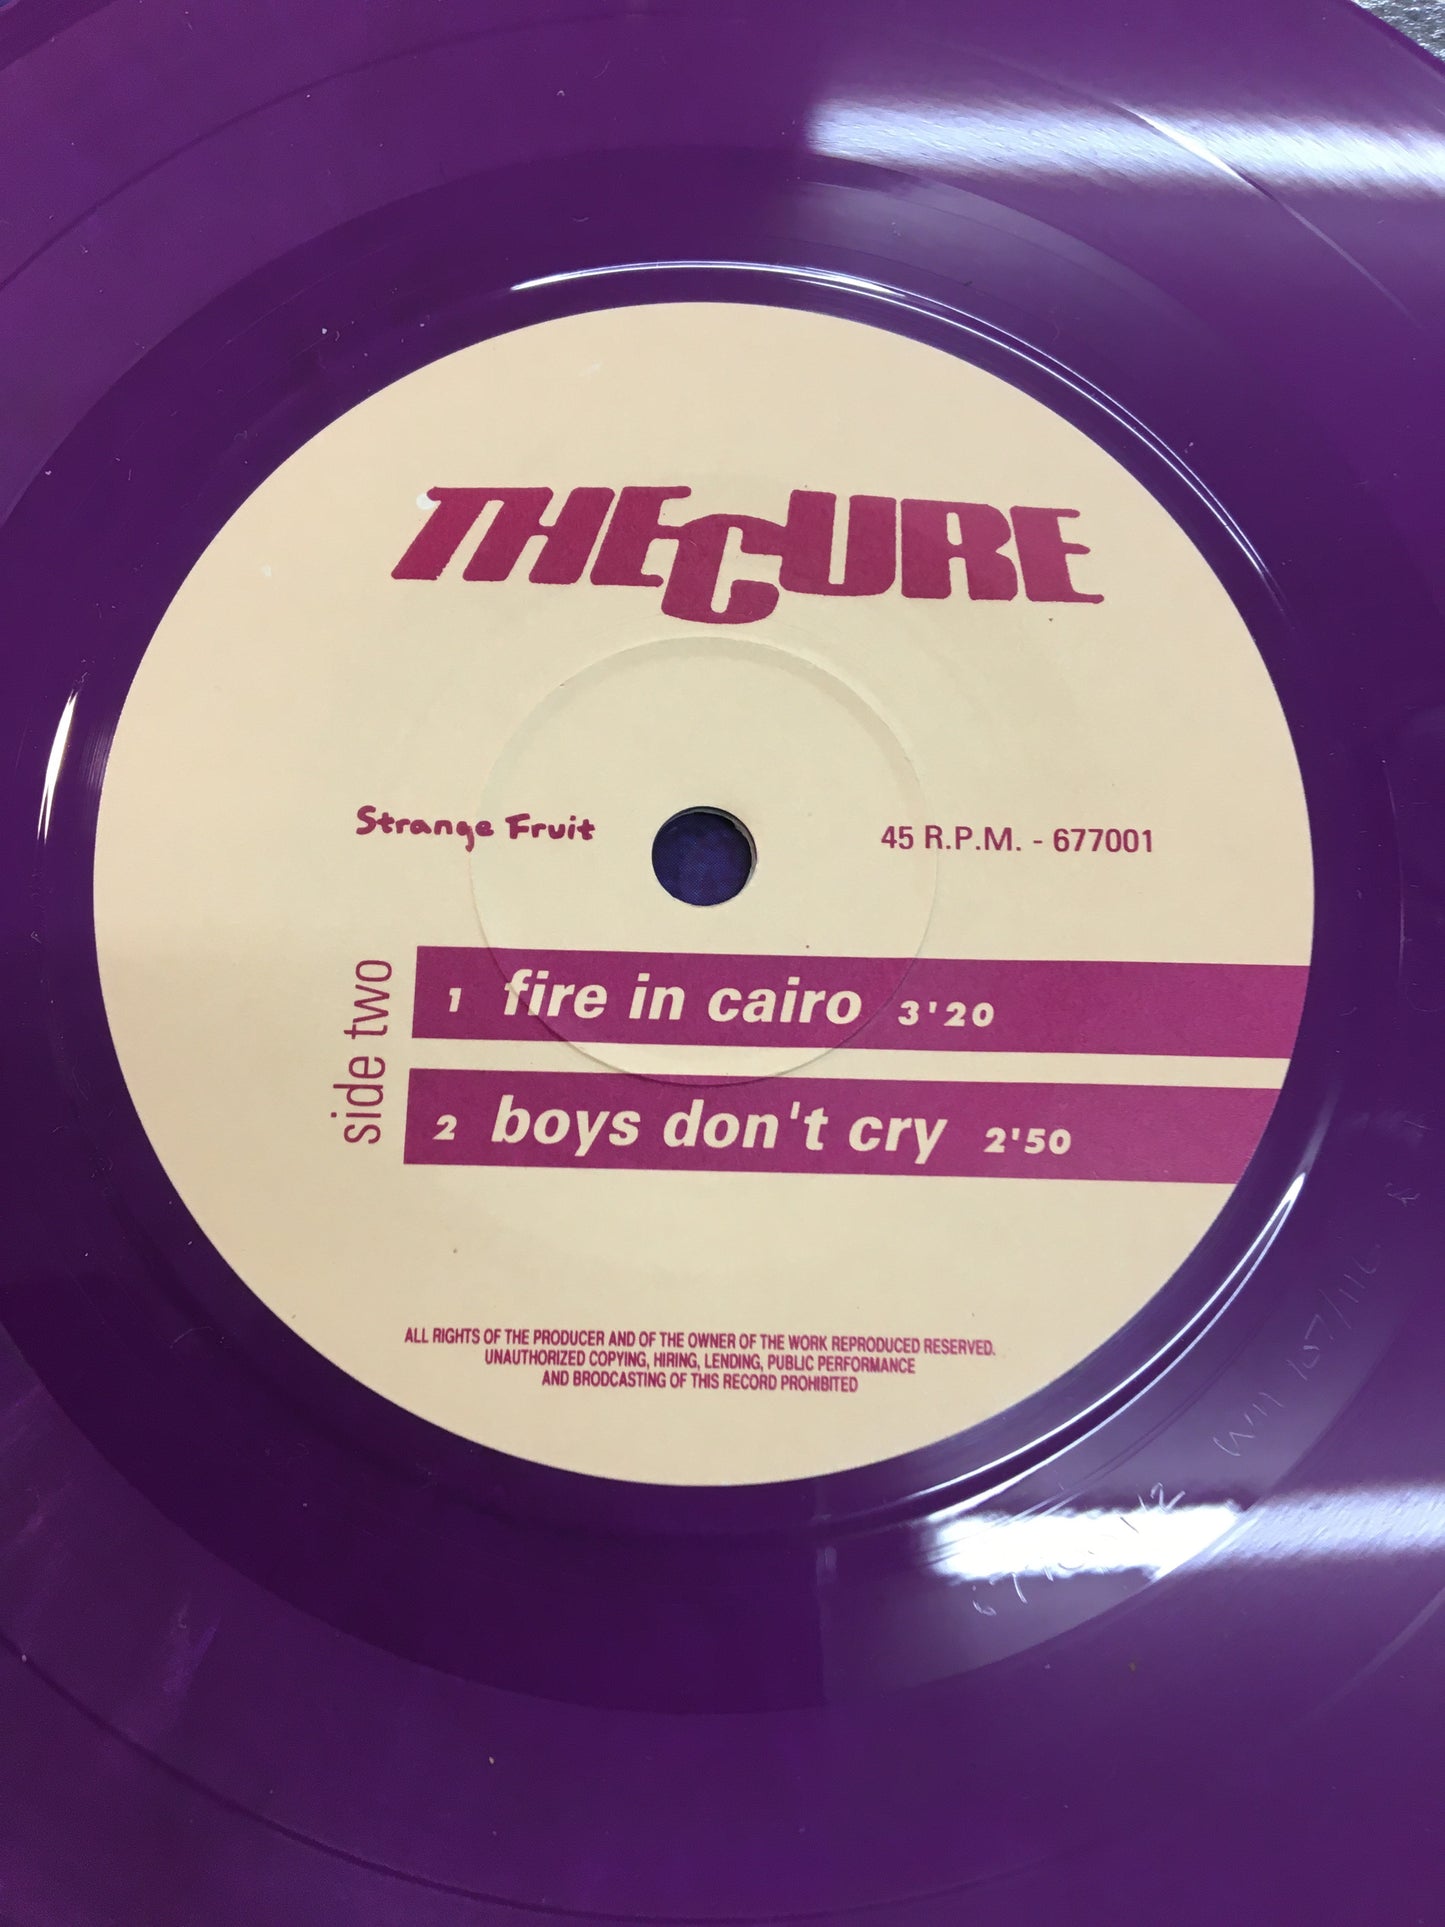 THE CURE 7” EP ; PEEL SESSIONS